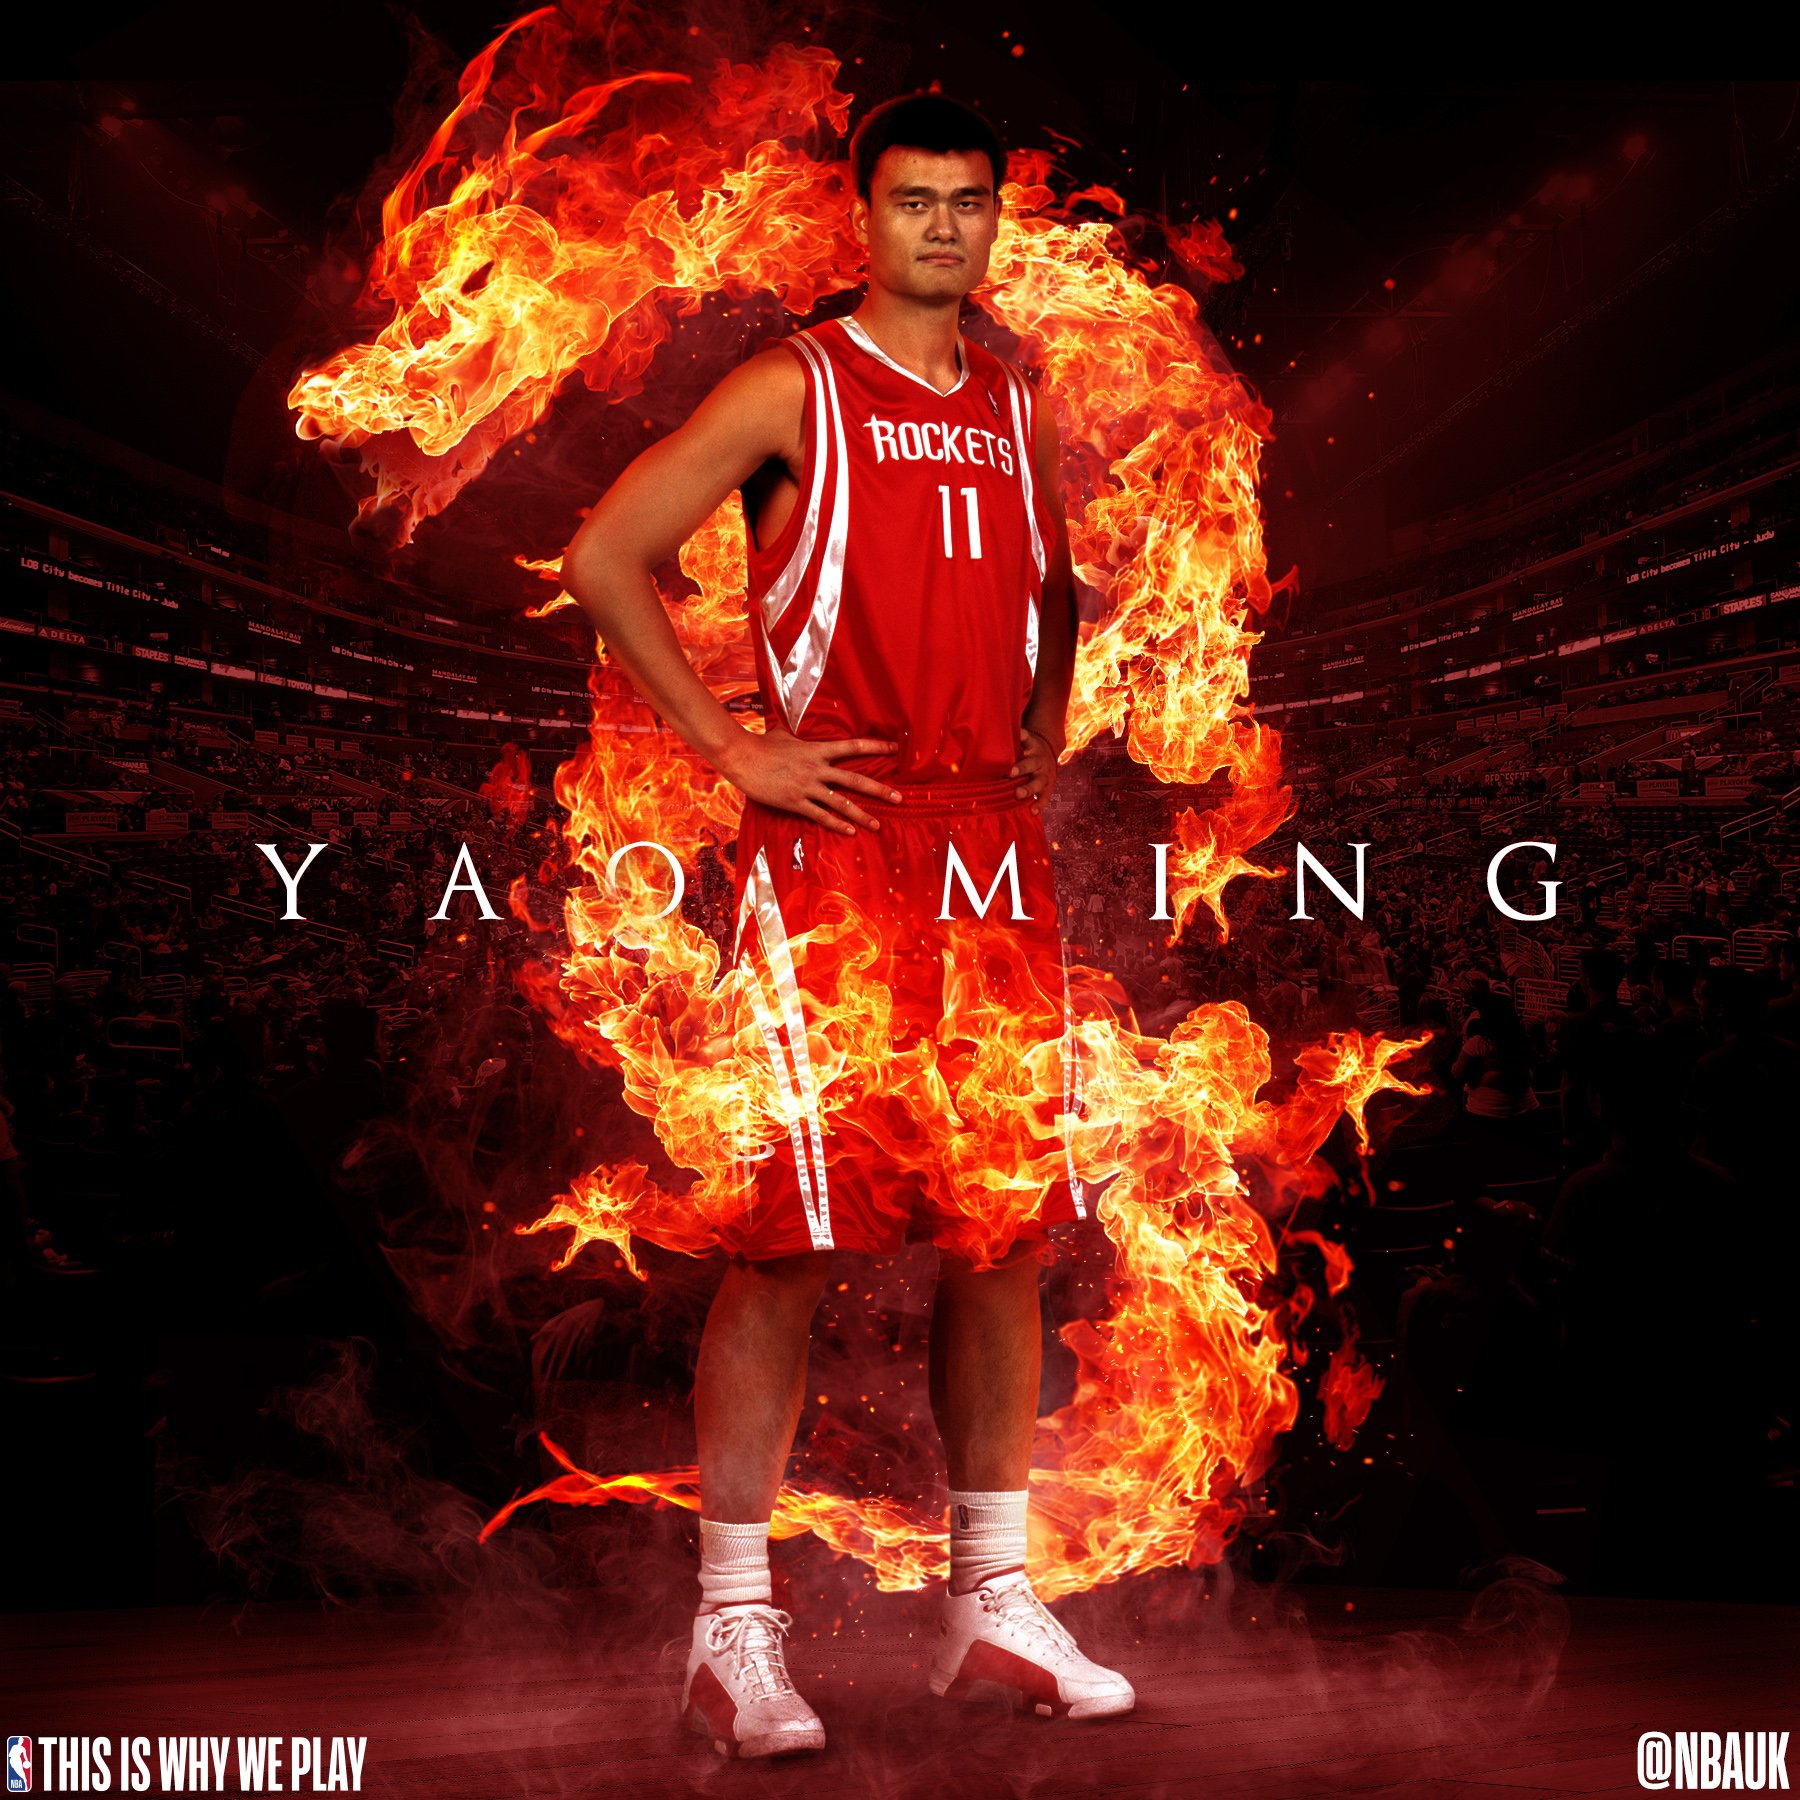 Happy birthday to a legend of the game. 

Yao Ming 